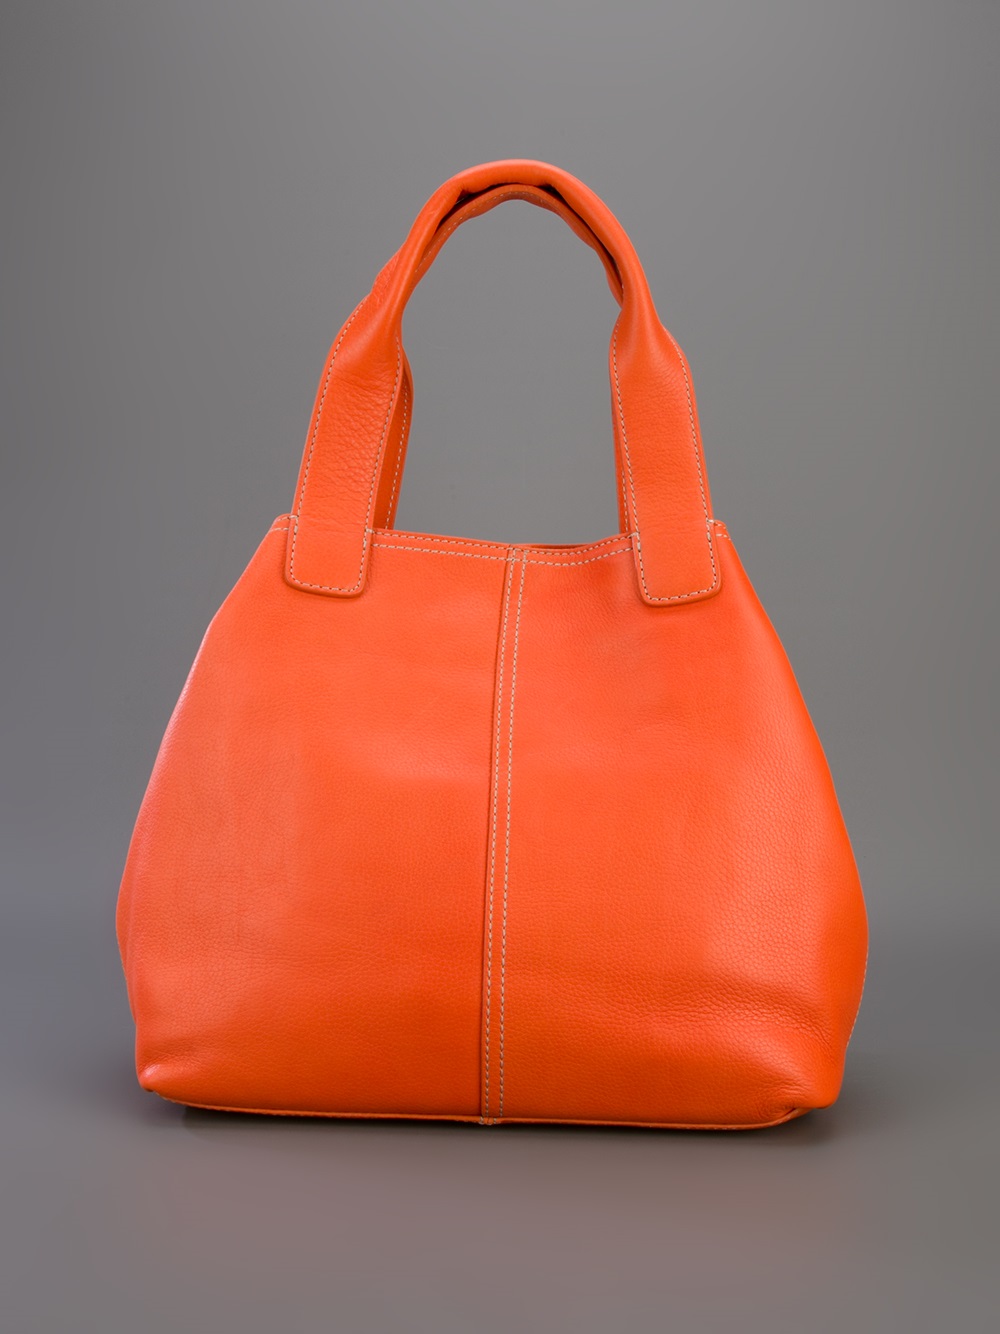 Lyst - Ugg Brooklyn Tote in Red